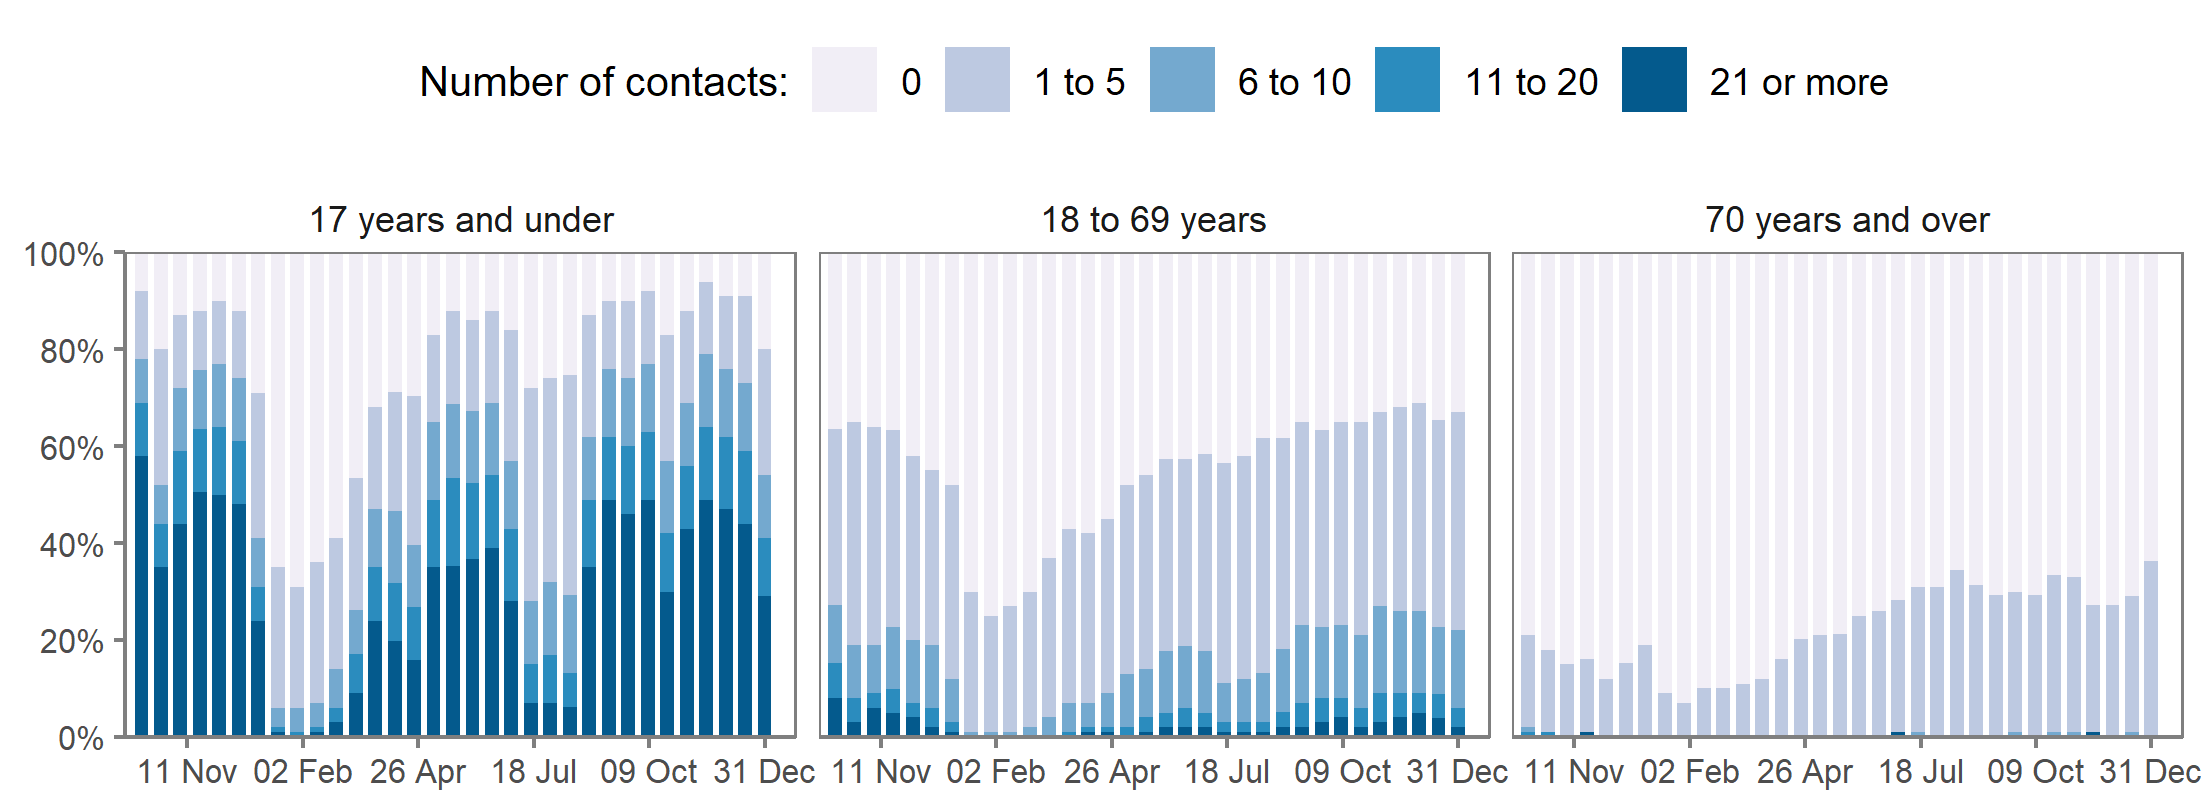 This chart shows the proportions of school-age children reporting each category of number of physical contacts (0, 1 to 5, 6 to 10, 11 to 20, and 21 or more contacts).  Children appear to have consistently had more physical contacts with those under 18 than with those aged 18-69 or over 70s.